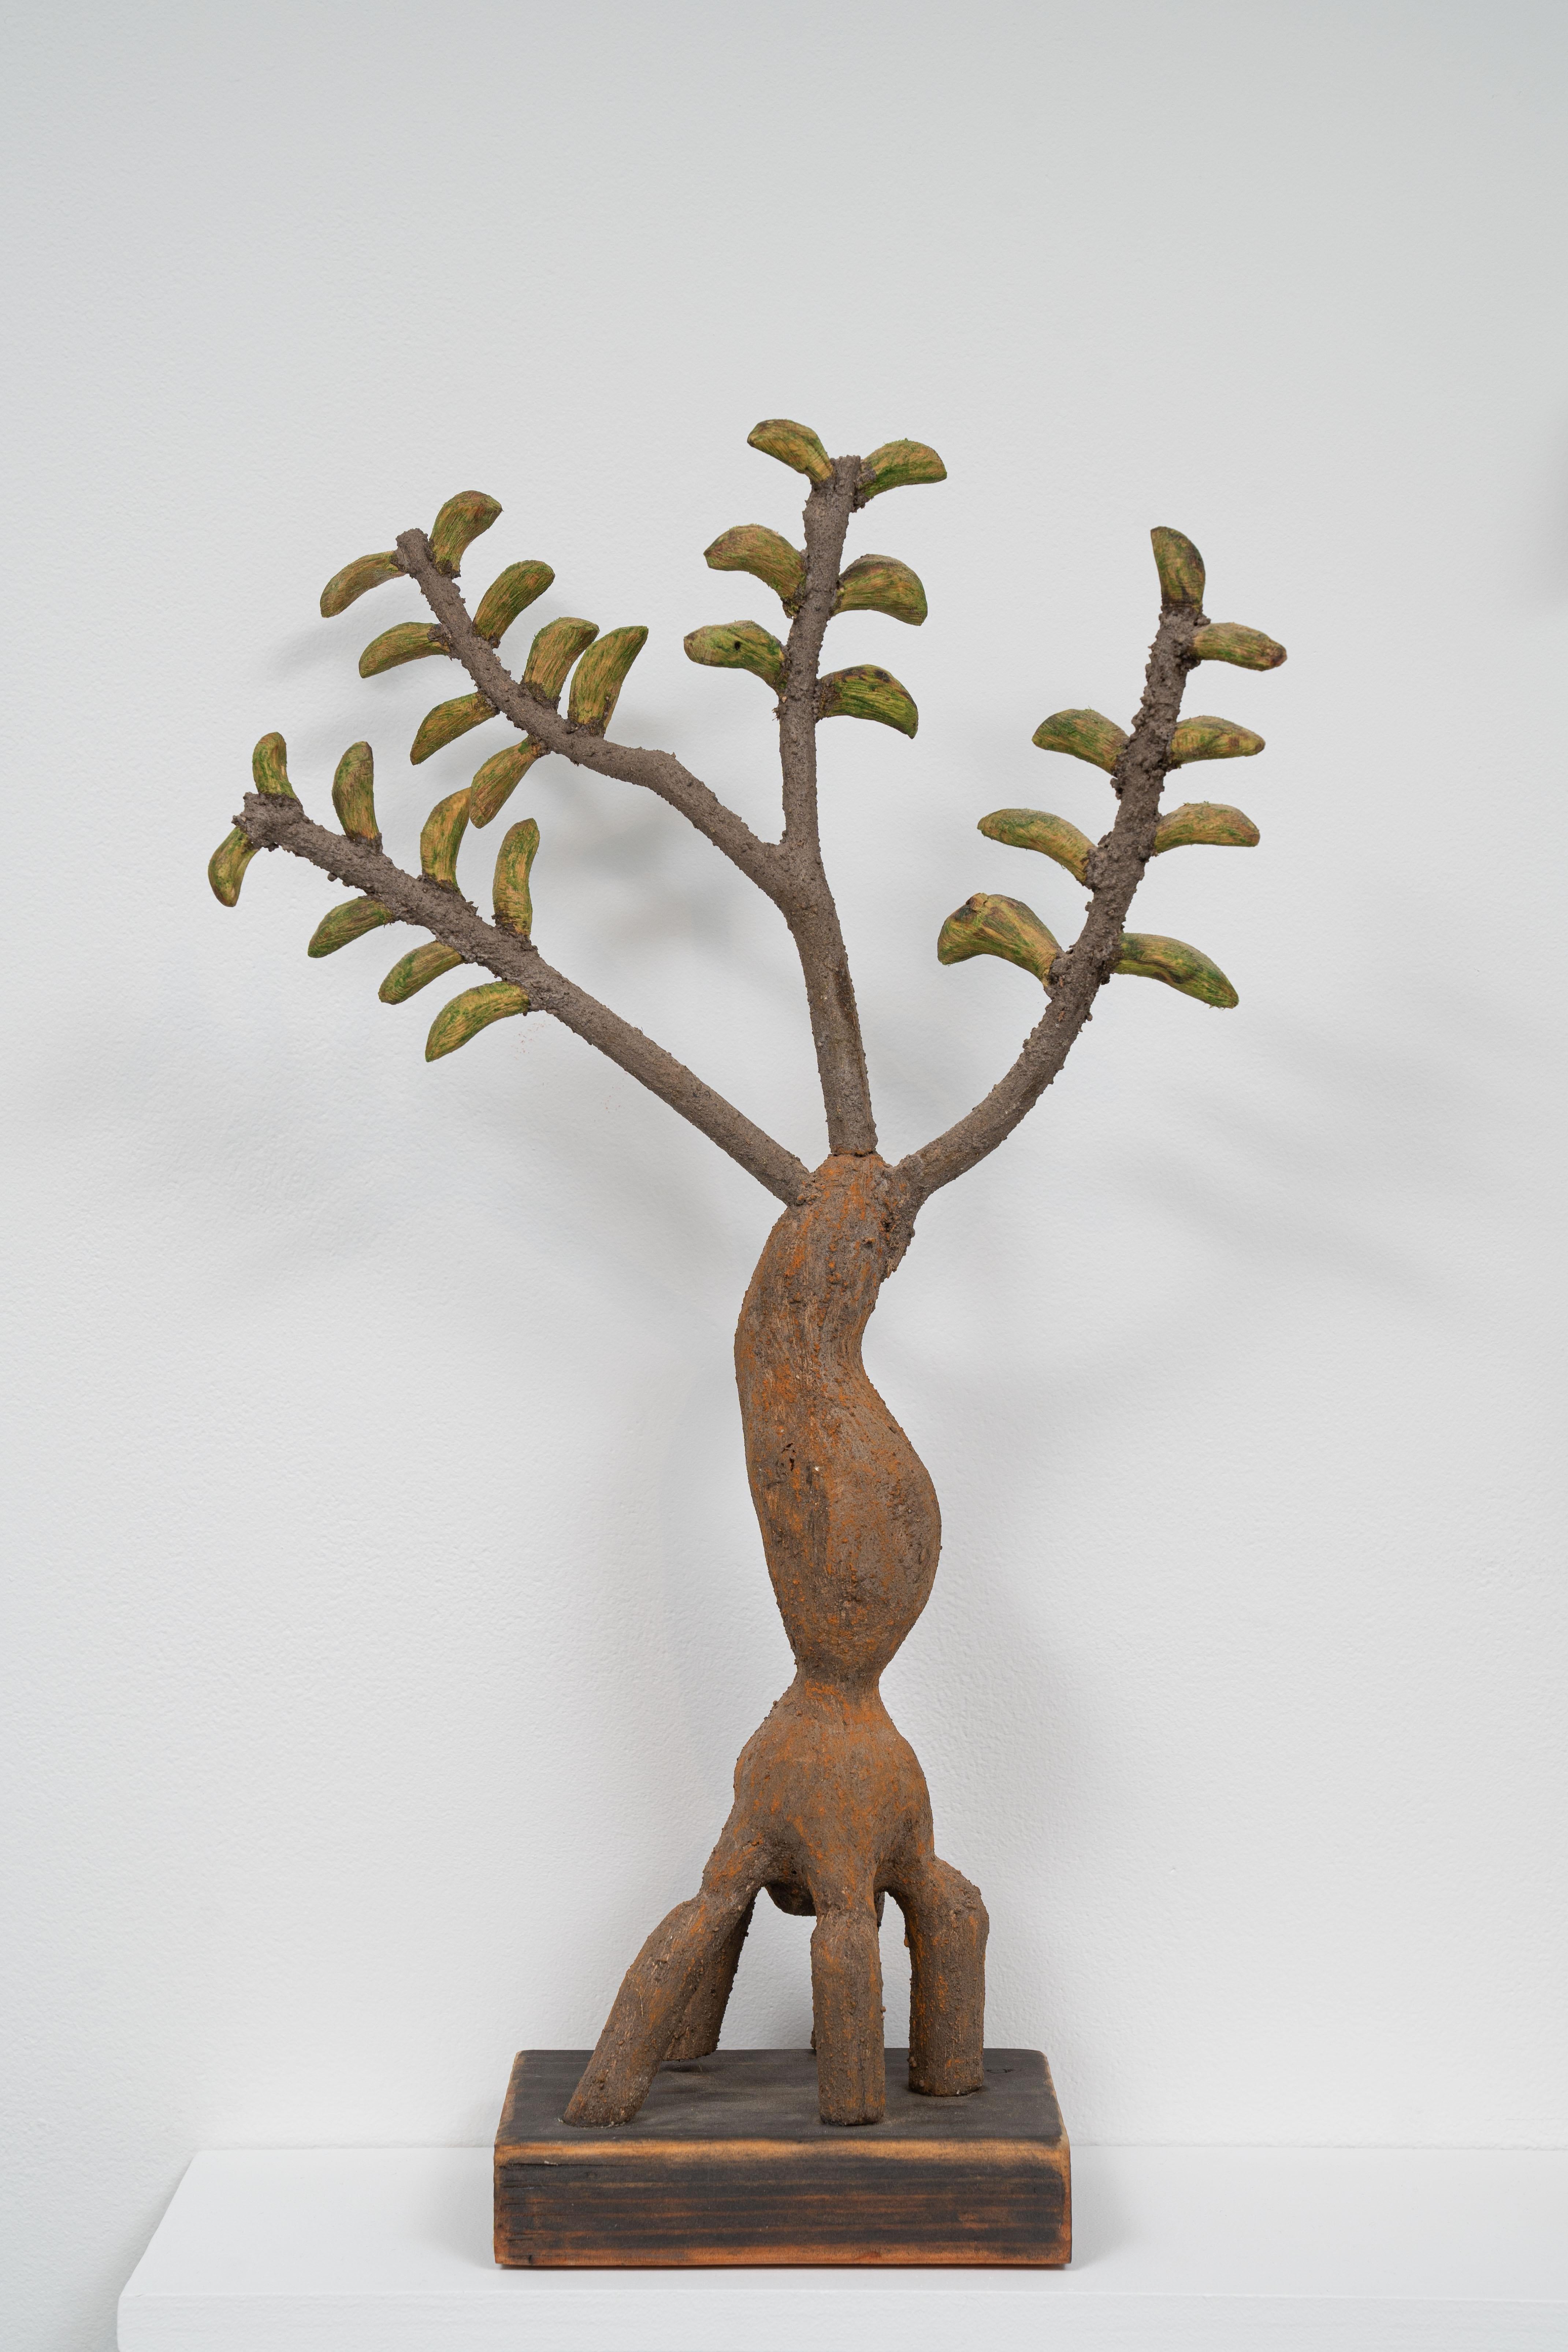 Sculpture of a tree: '5r'